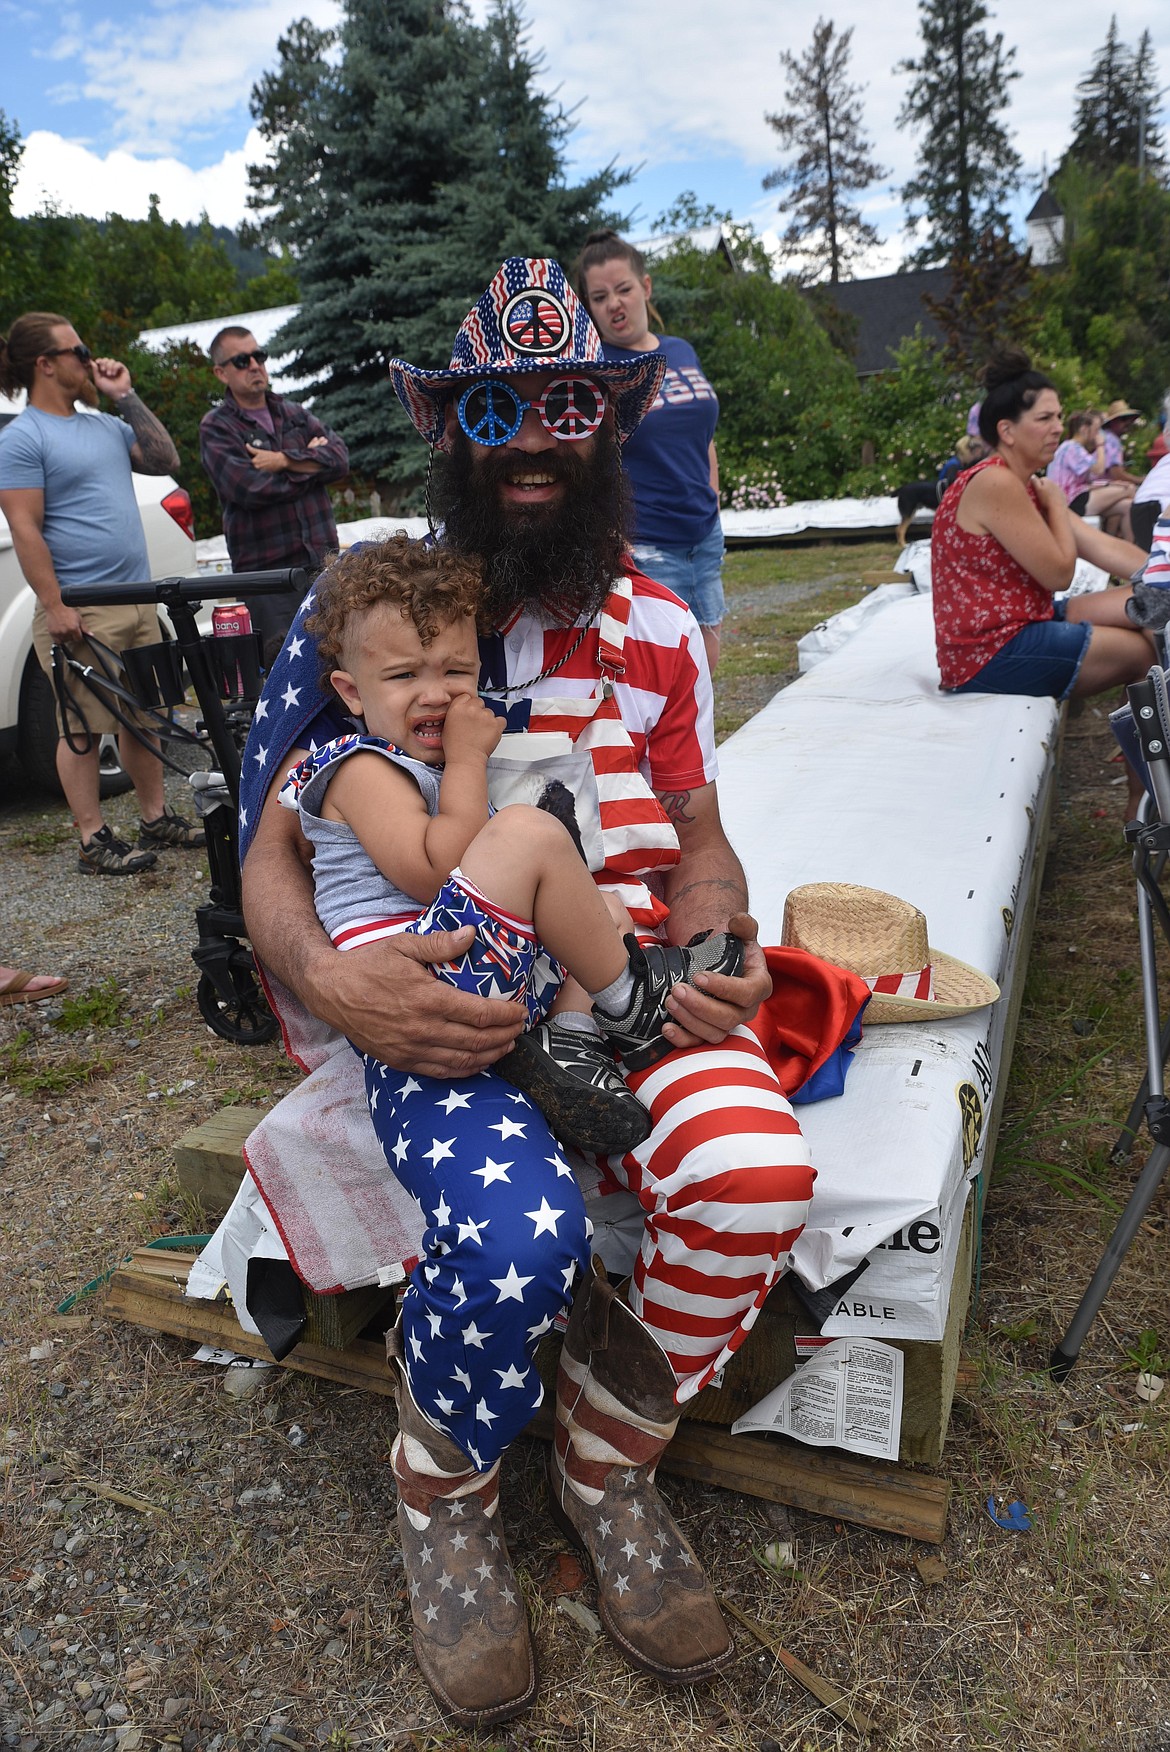 Troy resident Muley Borgmann and his son, Sawyer, "his little Captain America in training," enjoy the July 4 parade. (Scott Shindledecker/The Western News)